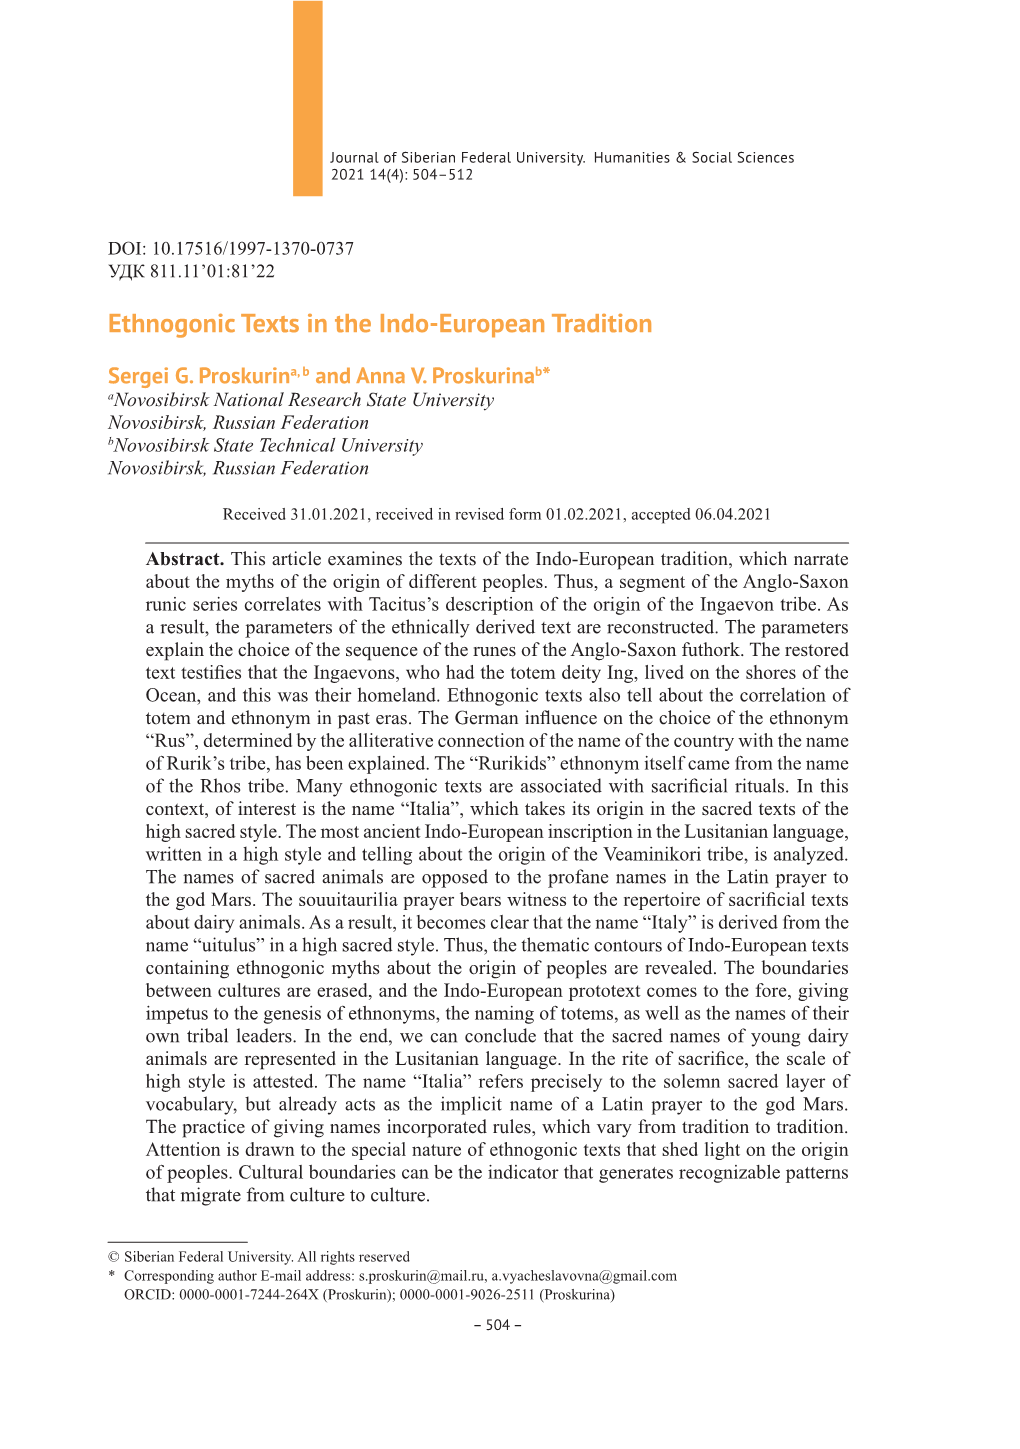 Ethnogonic Texts in the Indo-European Tradition